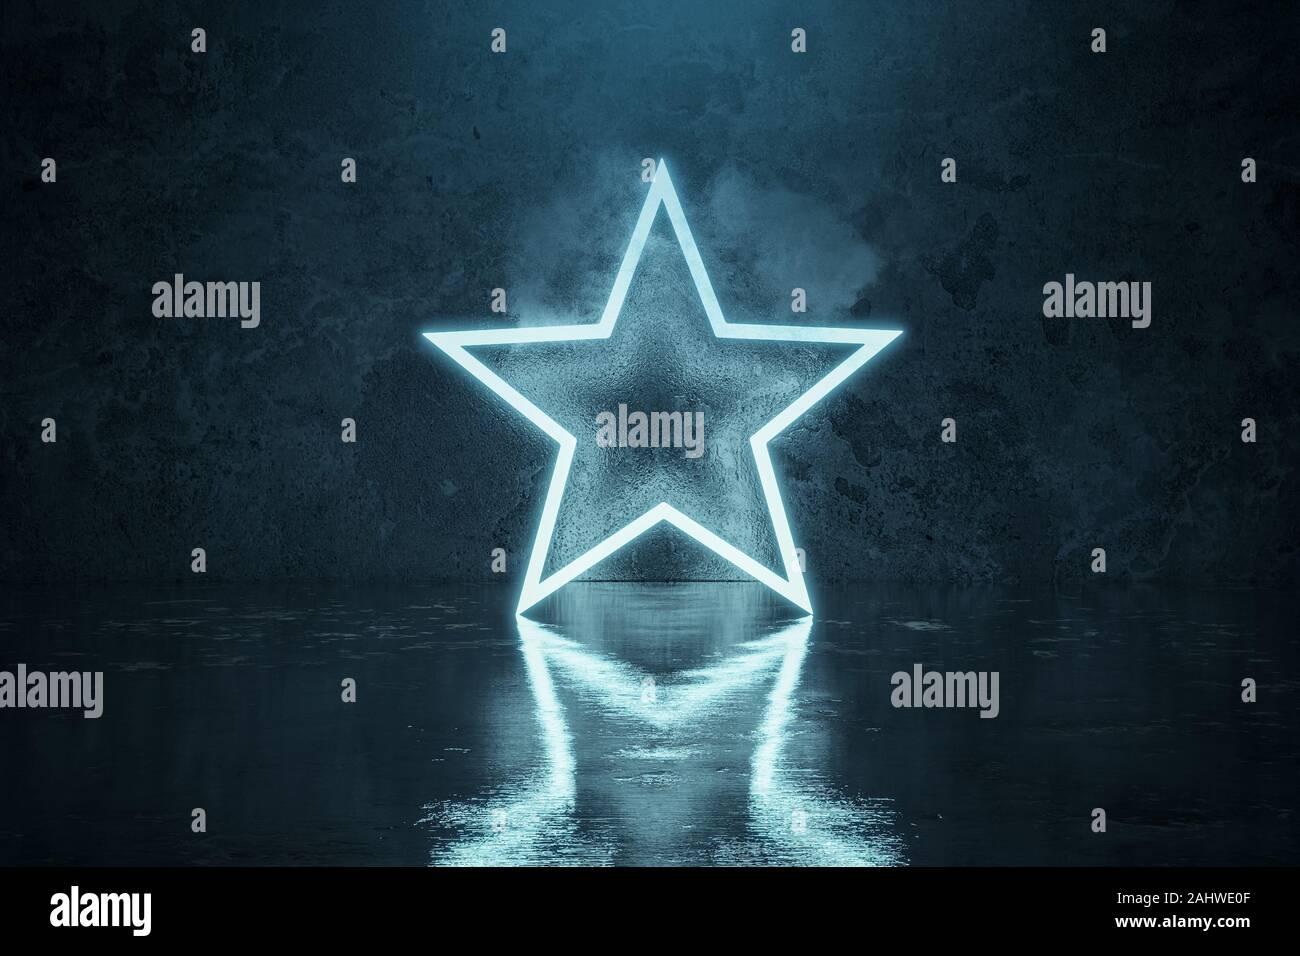 3d rendering of blue lighten star shape with light spot in front of grunge wall background with wet glossy floor Stock Photo